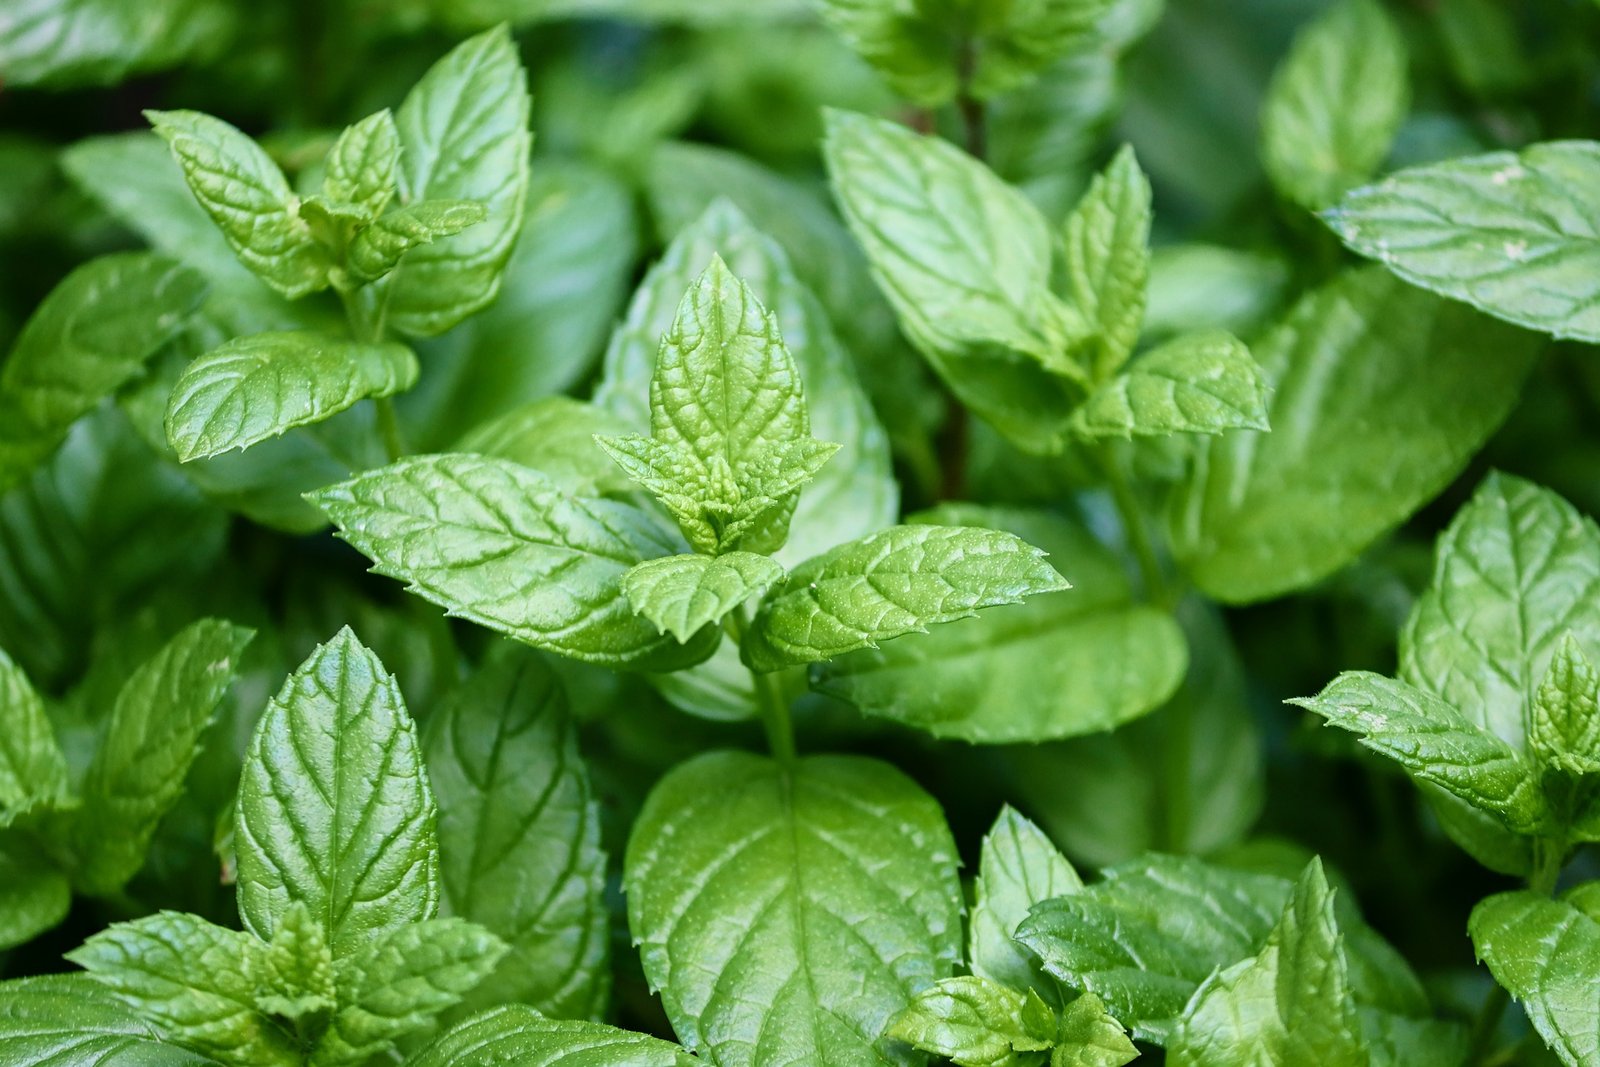 10 Simple Herbal Remedies From Your Garden - Peppermint